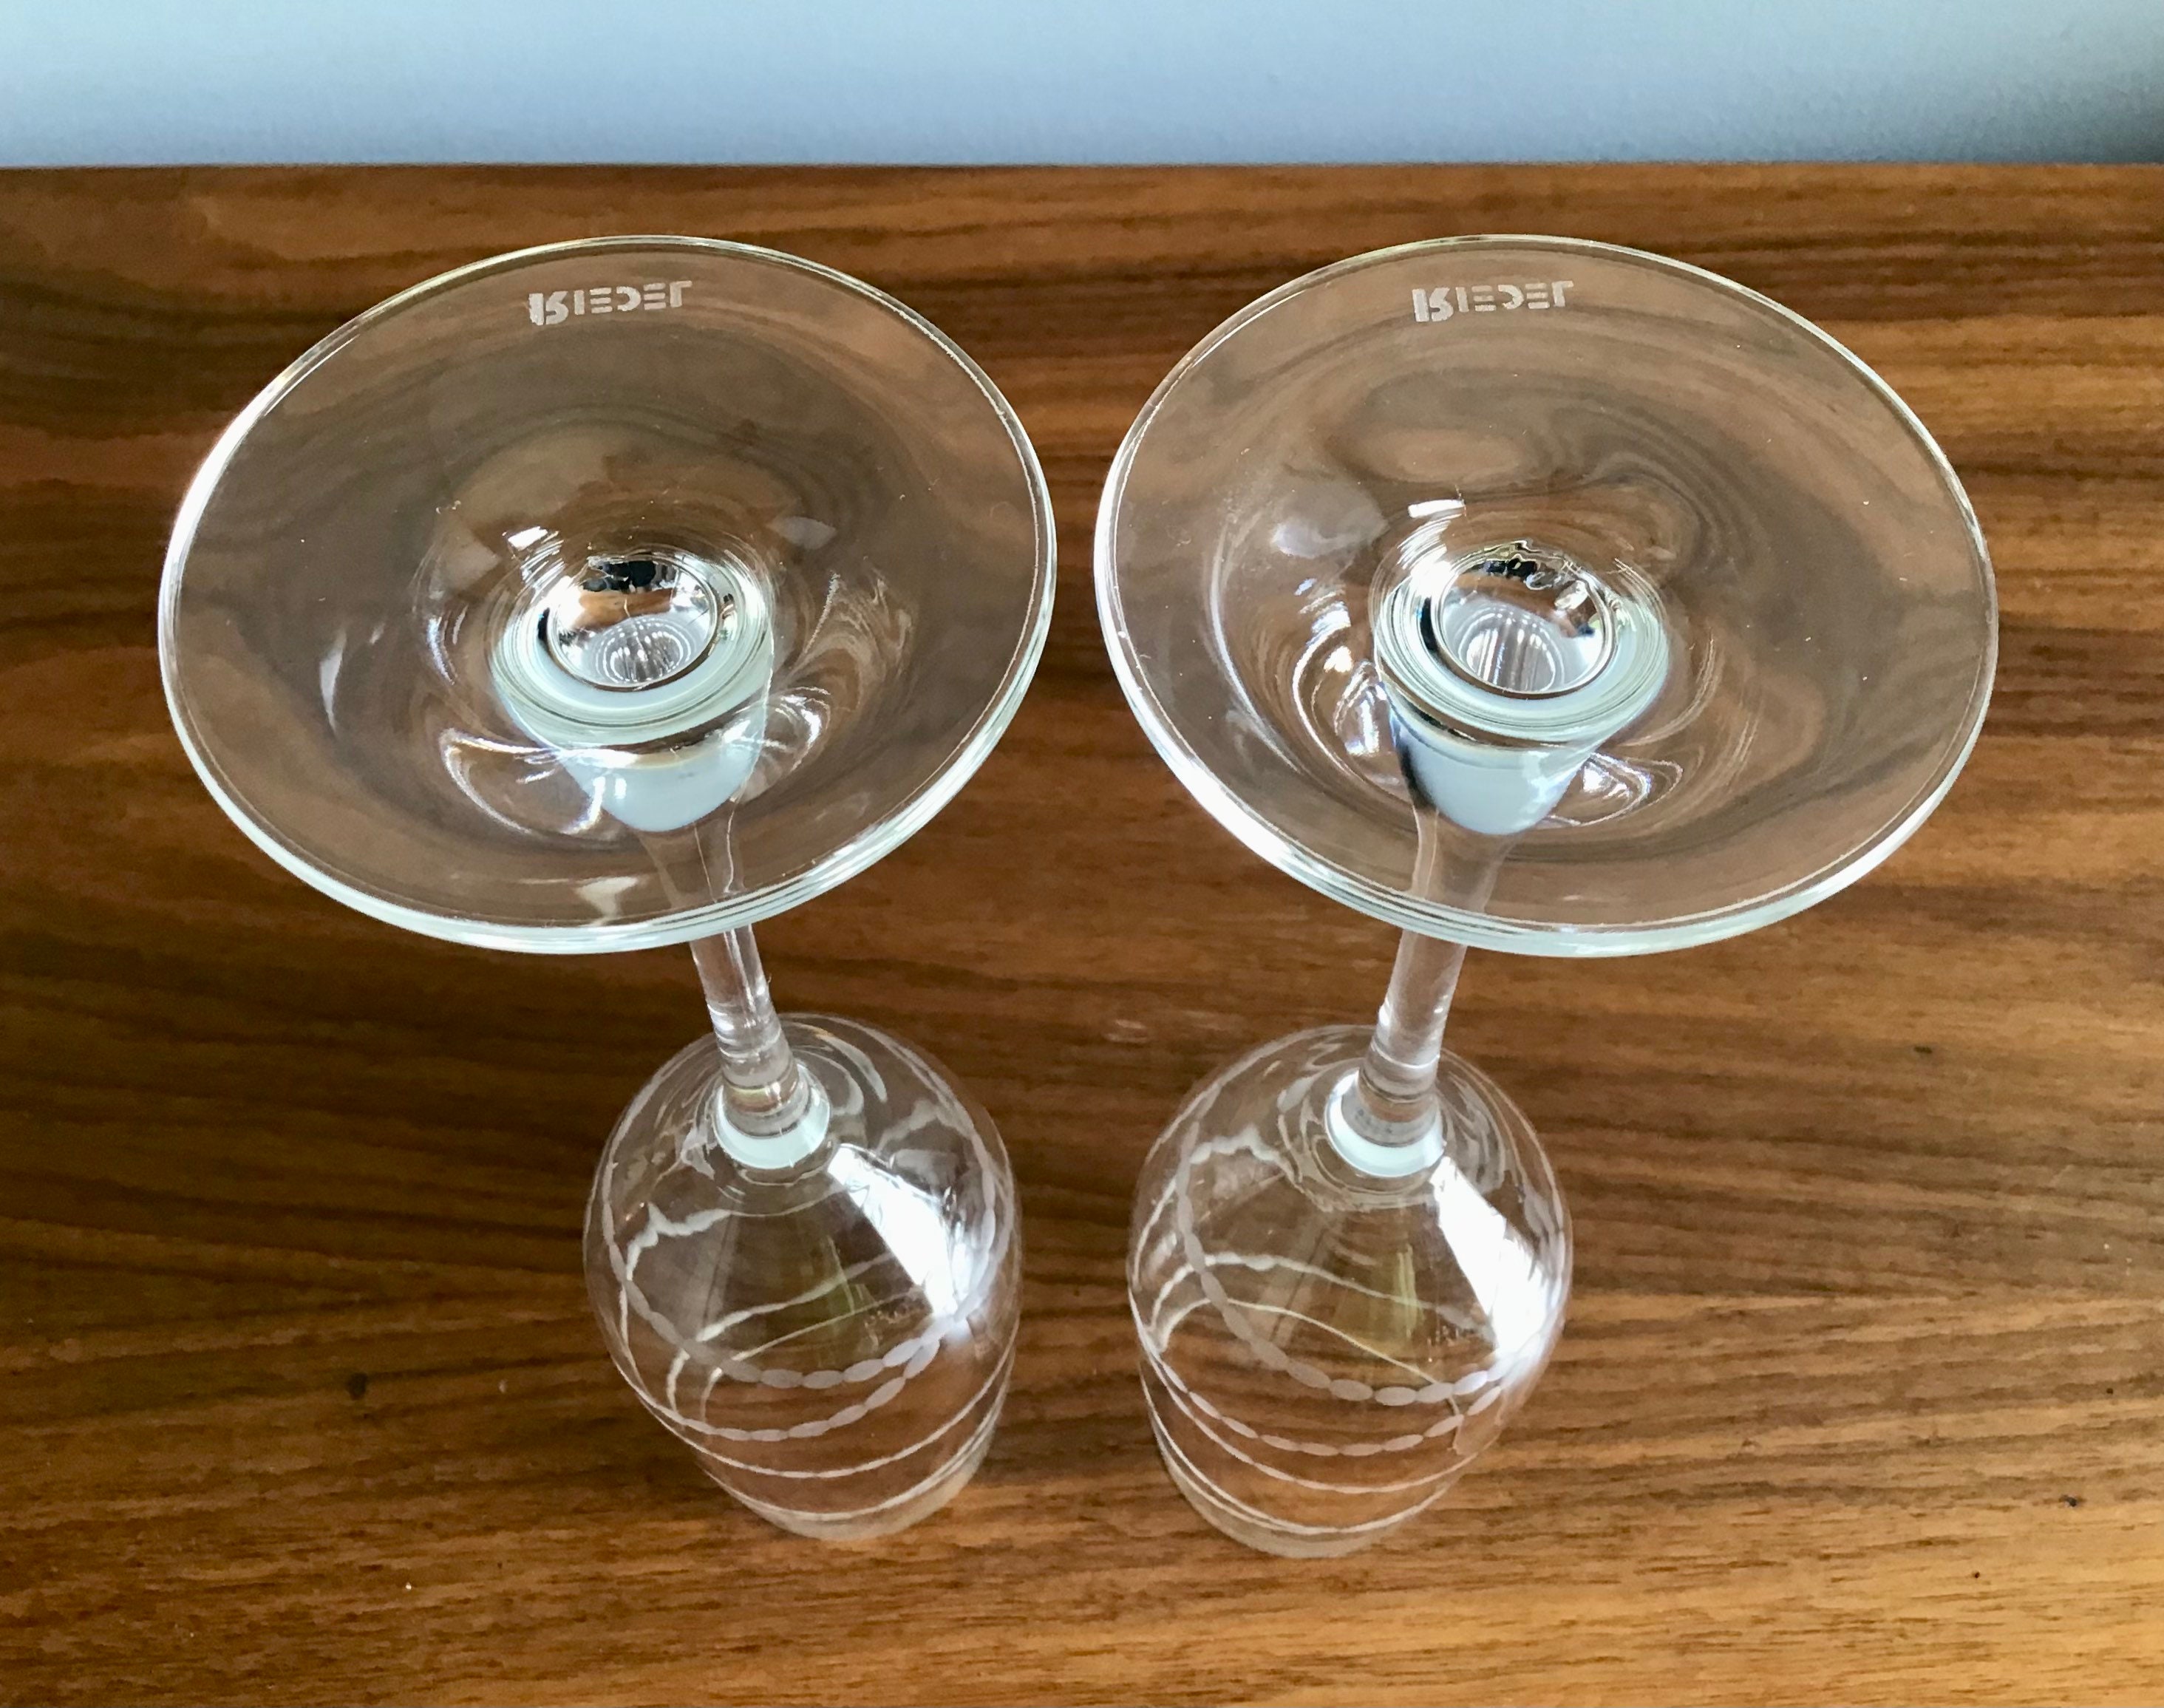 Latest Riedel Handblown Champagne/Wine Flutes w/Riedel Label/Etched on Base